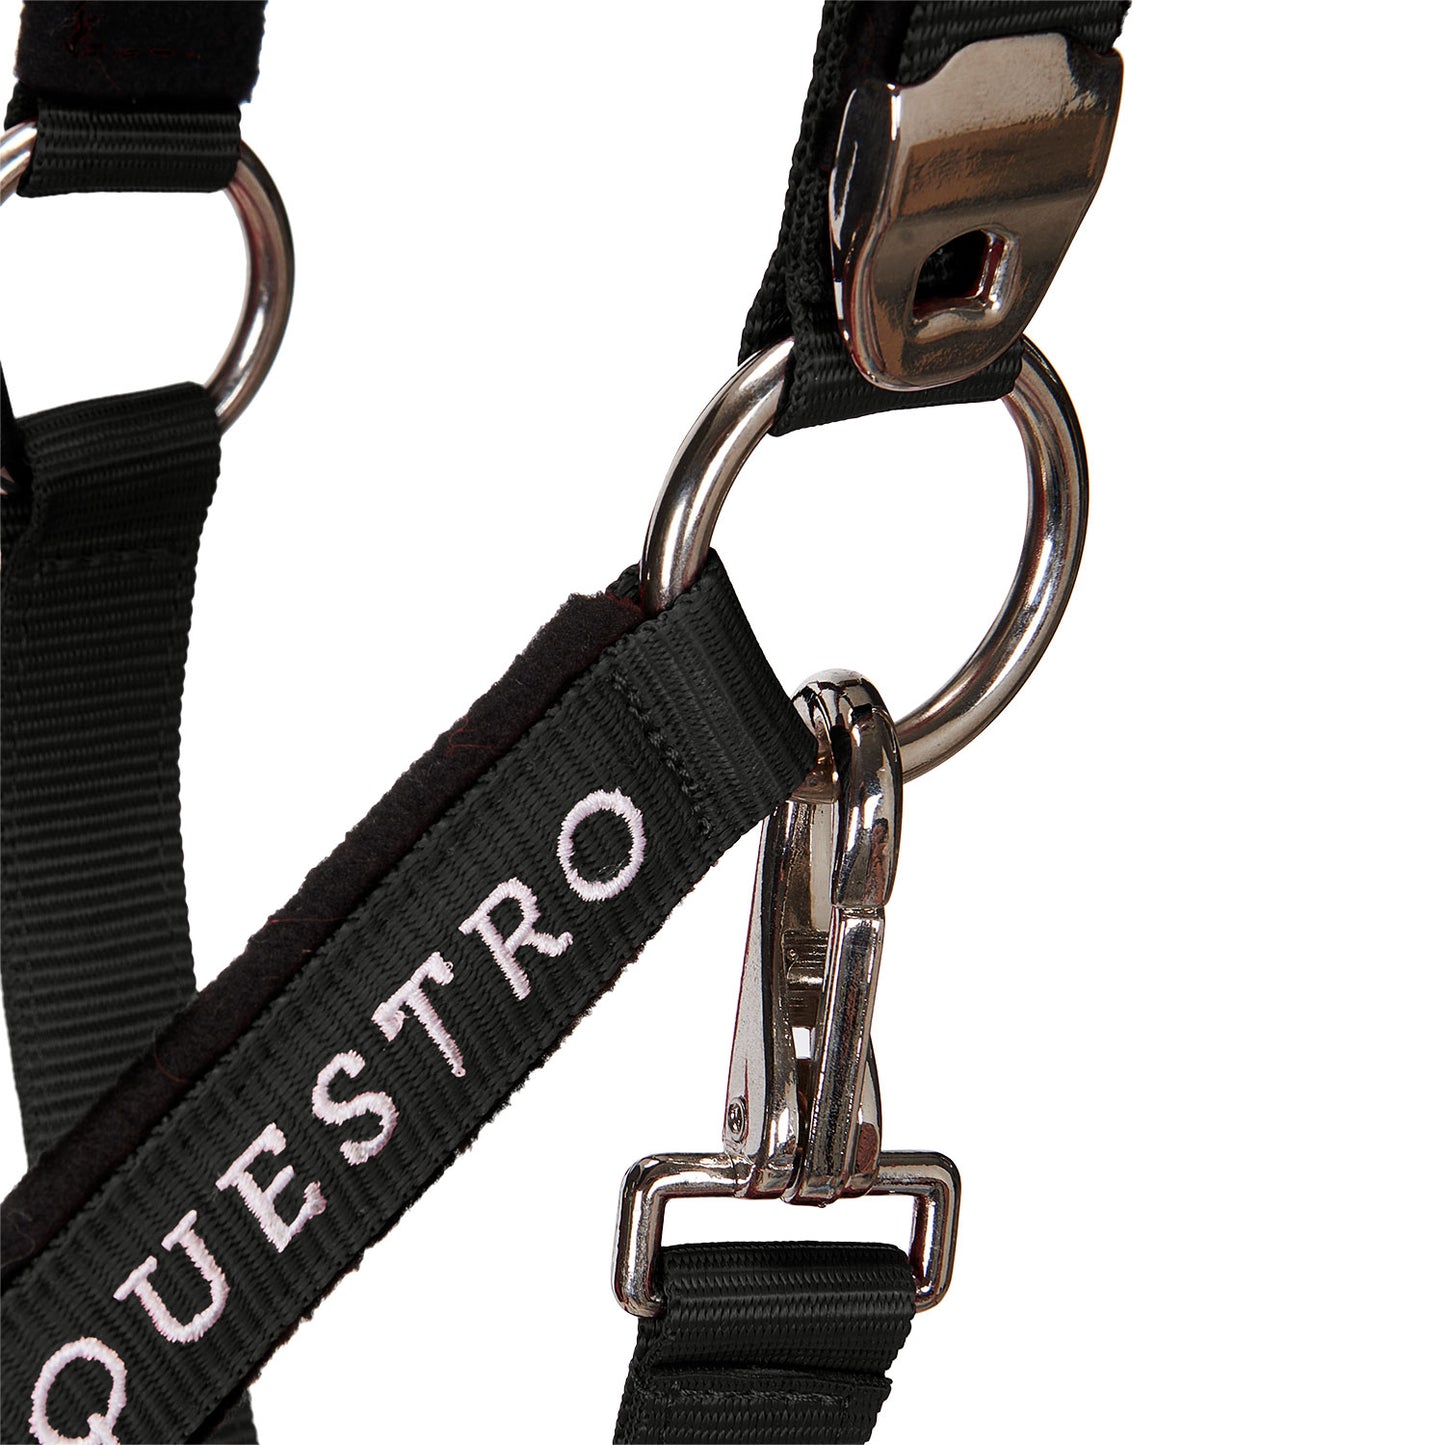 EQUESTRO - Halter with Leadrope